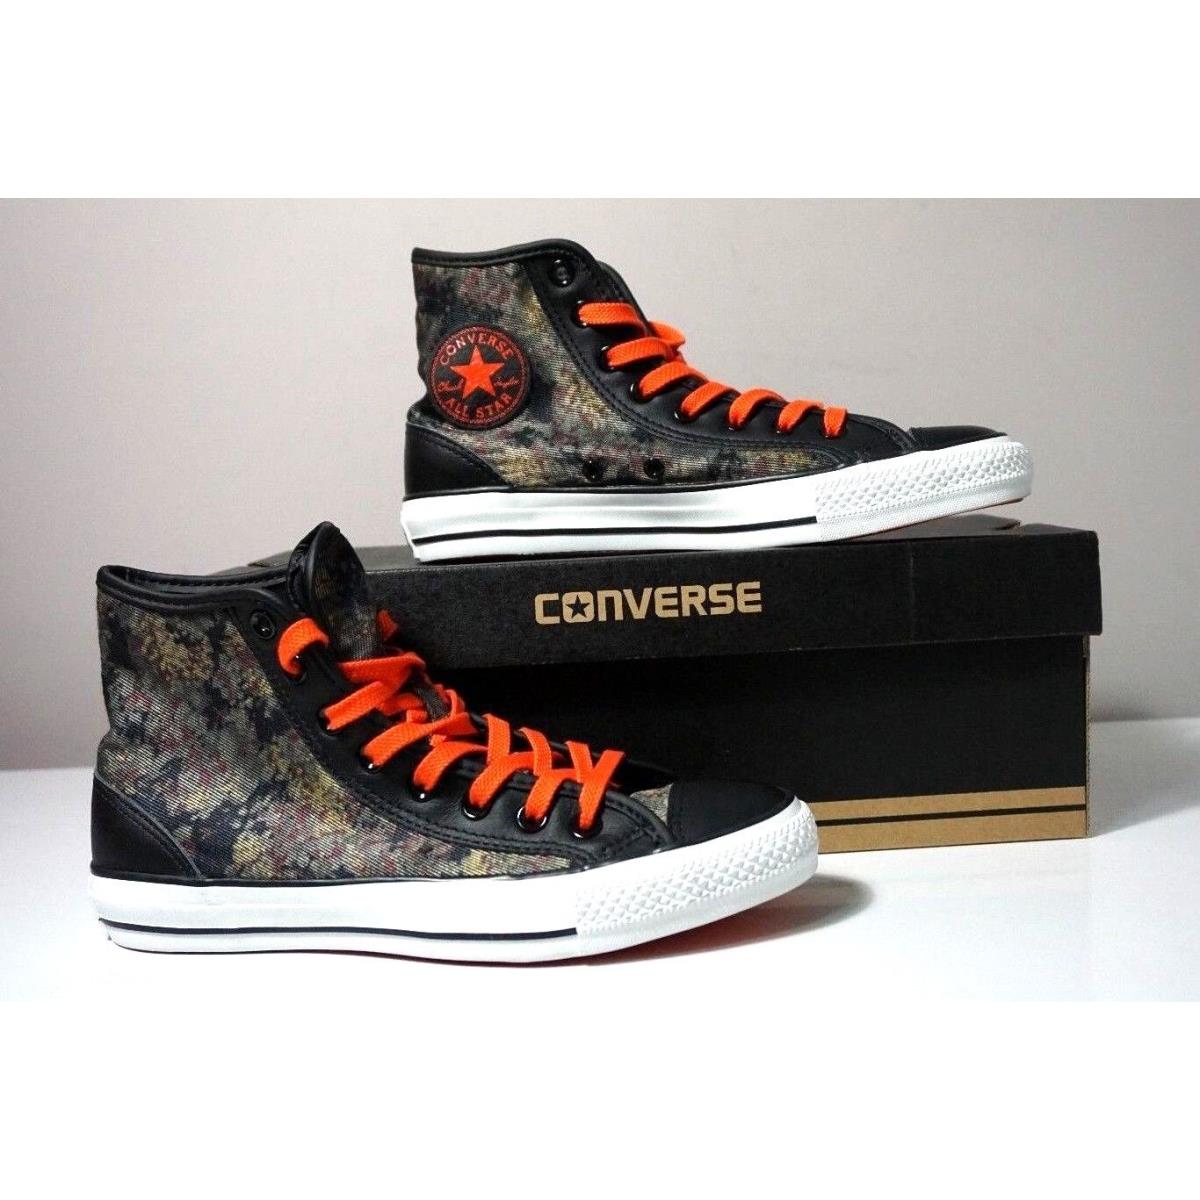 Converse All Star Overlay Hi Top Cactus/black Basketball Shoes 146461C Size 7